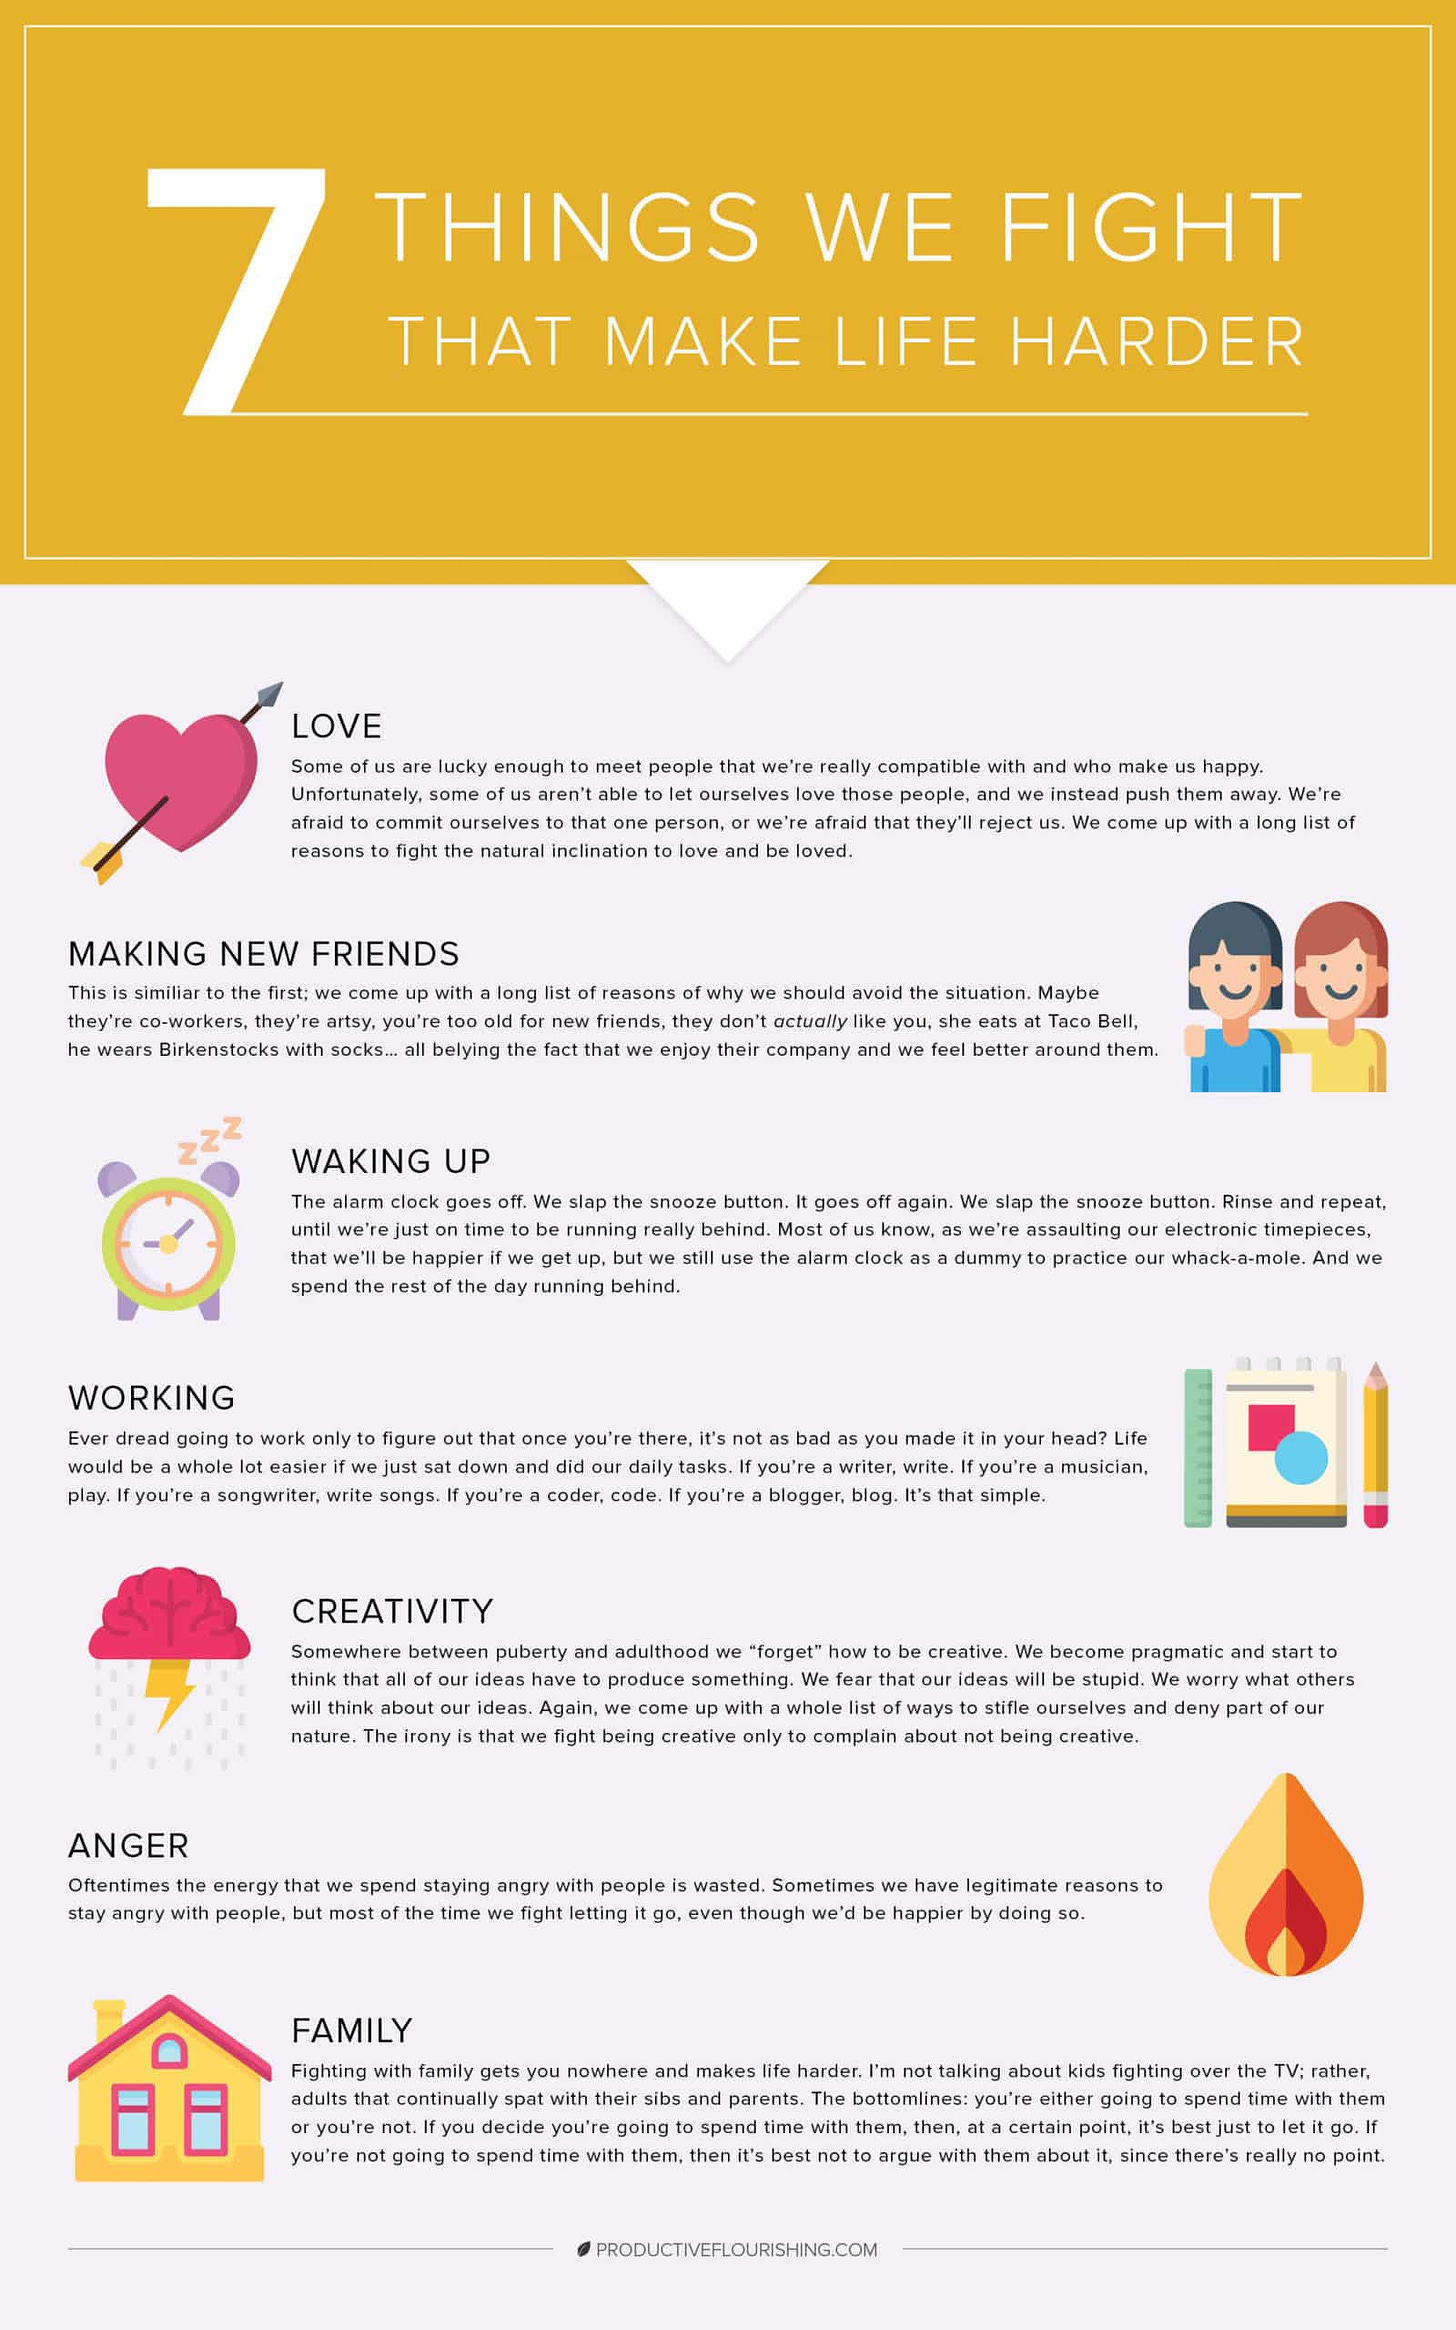 Which of these seven things are you fighting? Life is much easier, and more enjoyable, if we stop fighting the things we shouldn’t. #personaldevelopment #infographic #productiveflourishing